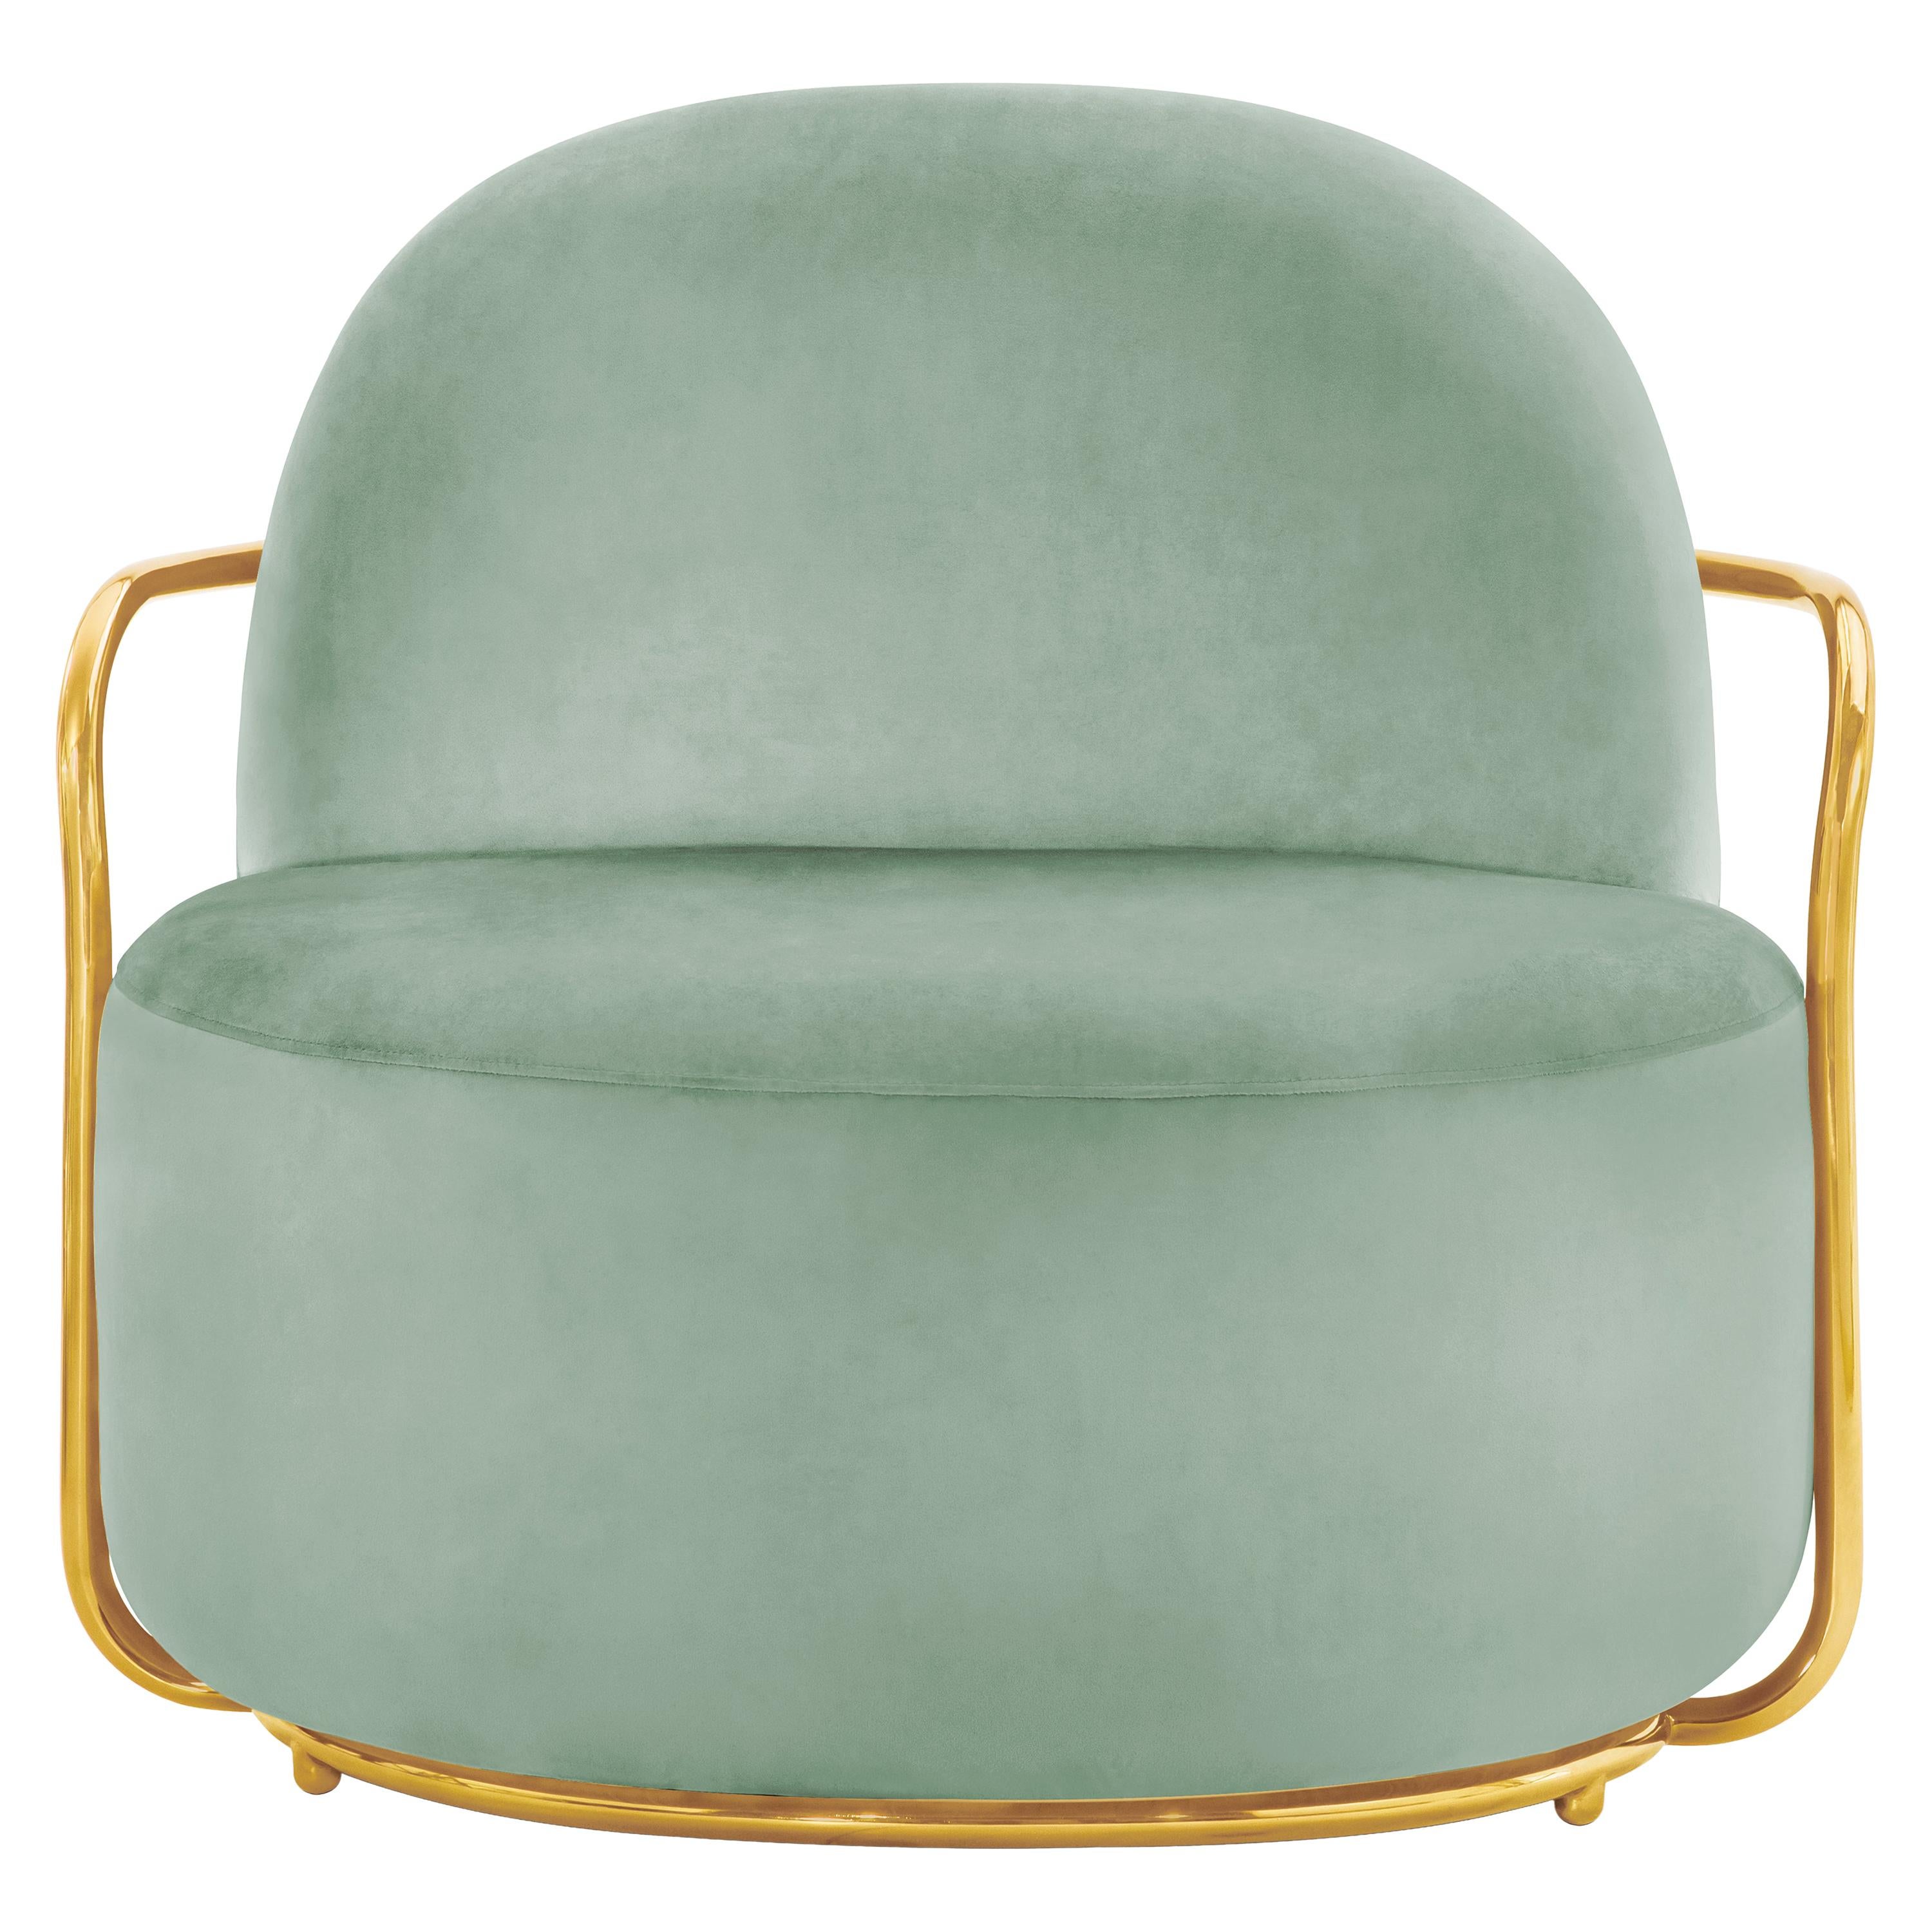 Orion Lounge Chair with Plush Mint Green Velvet and Gold Arms by Nika Zupanc For Sale